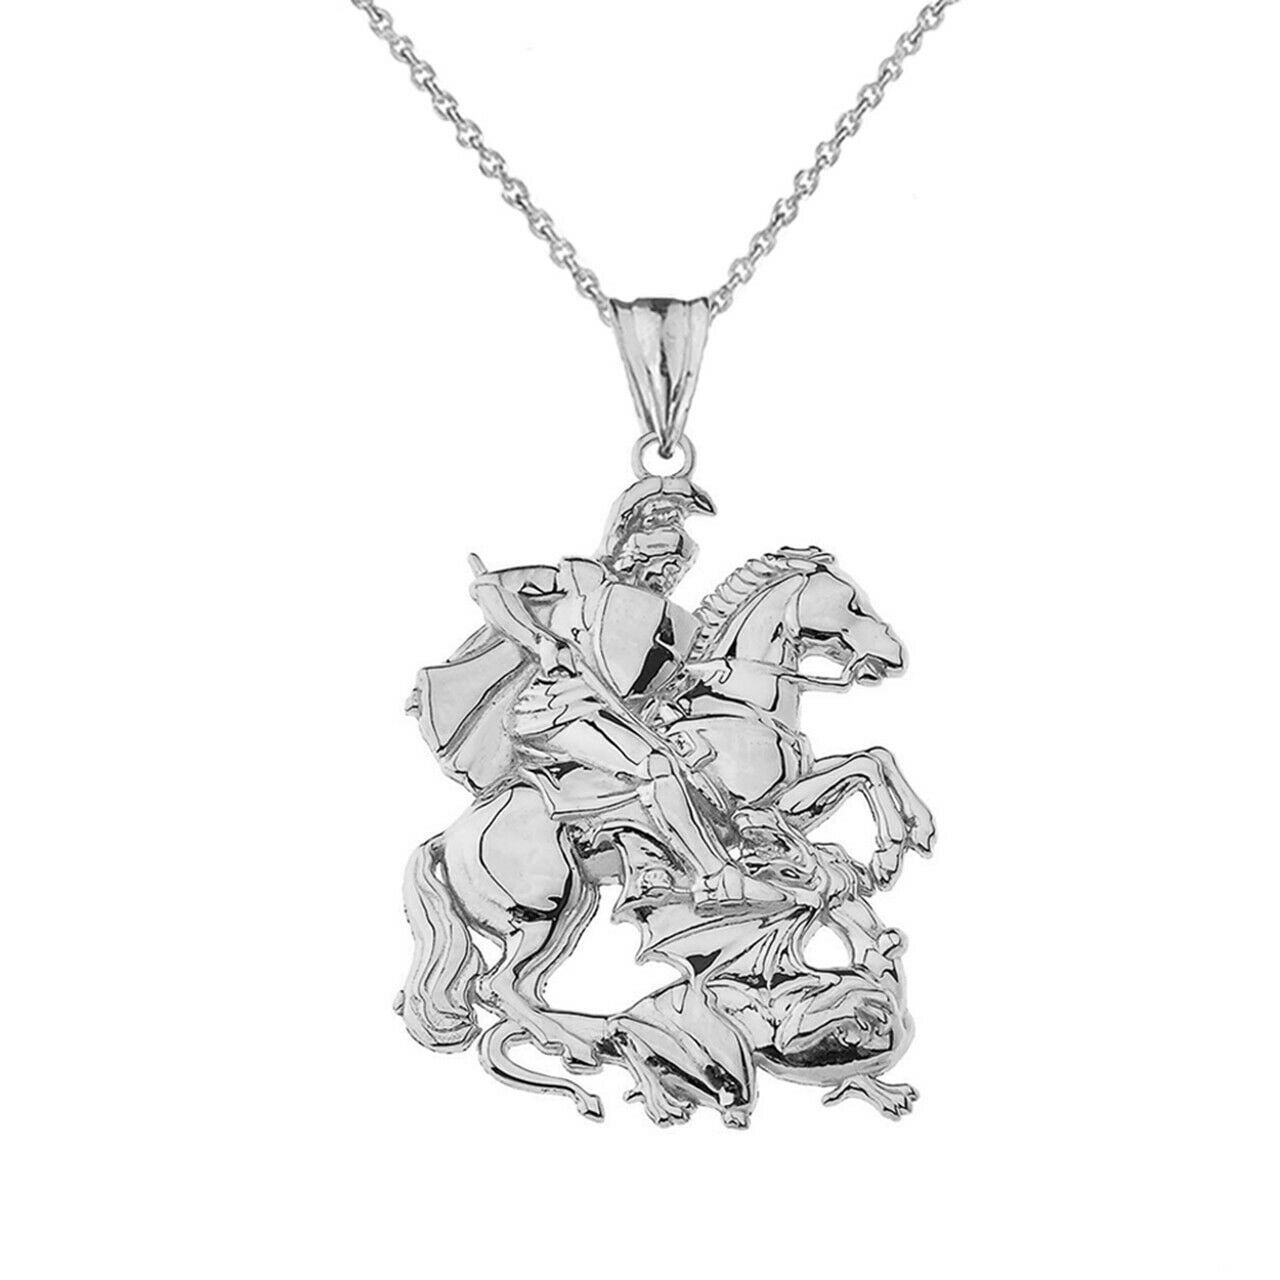 925 Sterling Silver Saint George Pendant Necklace - £25.54 GBP - £45.62 GBP